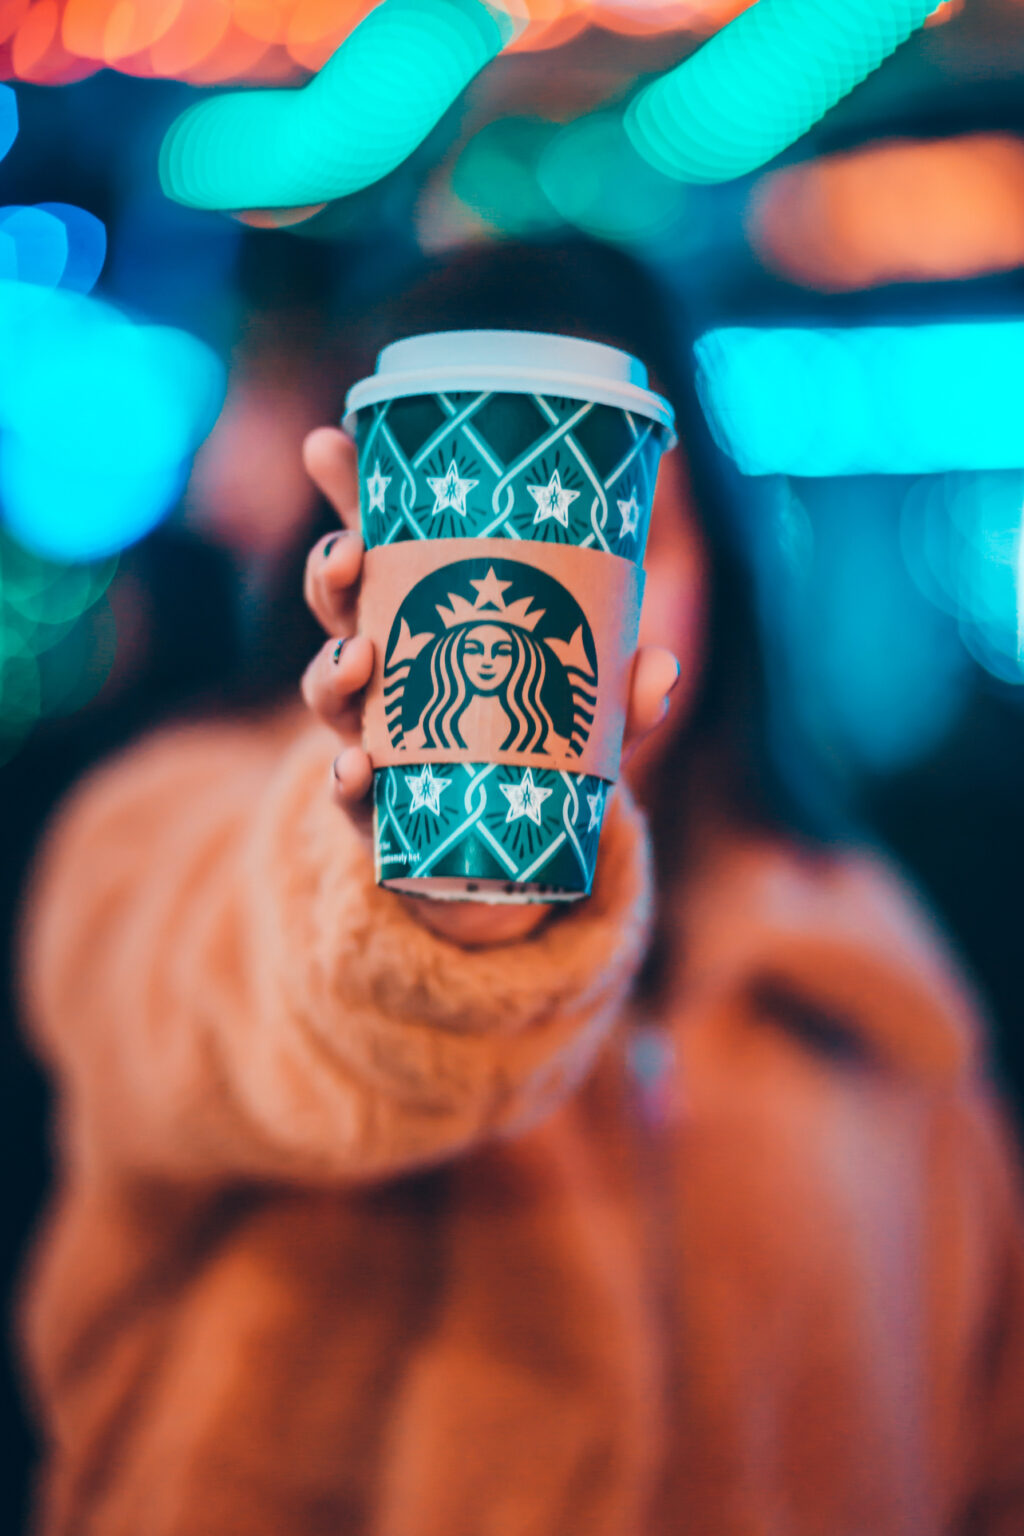 The Starbucks 2021 Christmas Cups Are Already Being Spotted. Here's